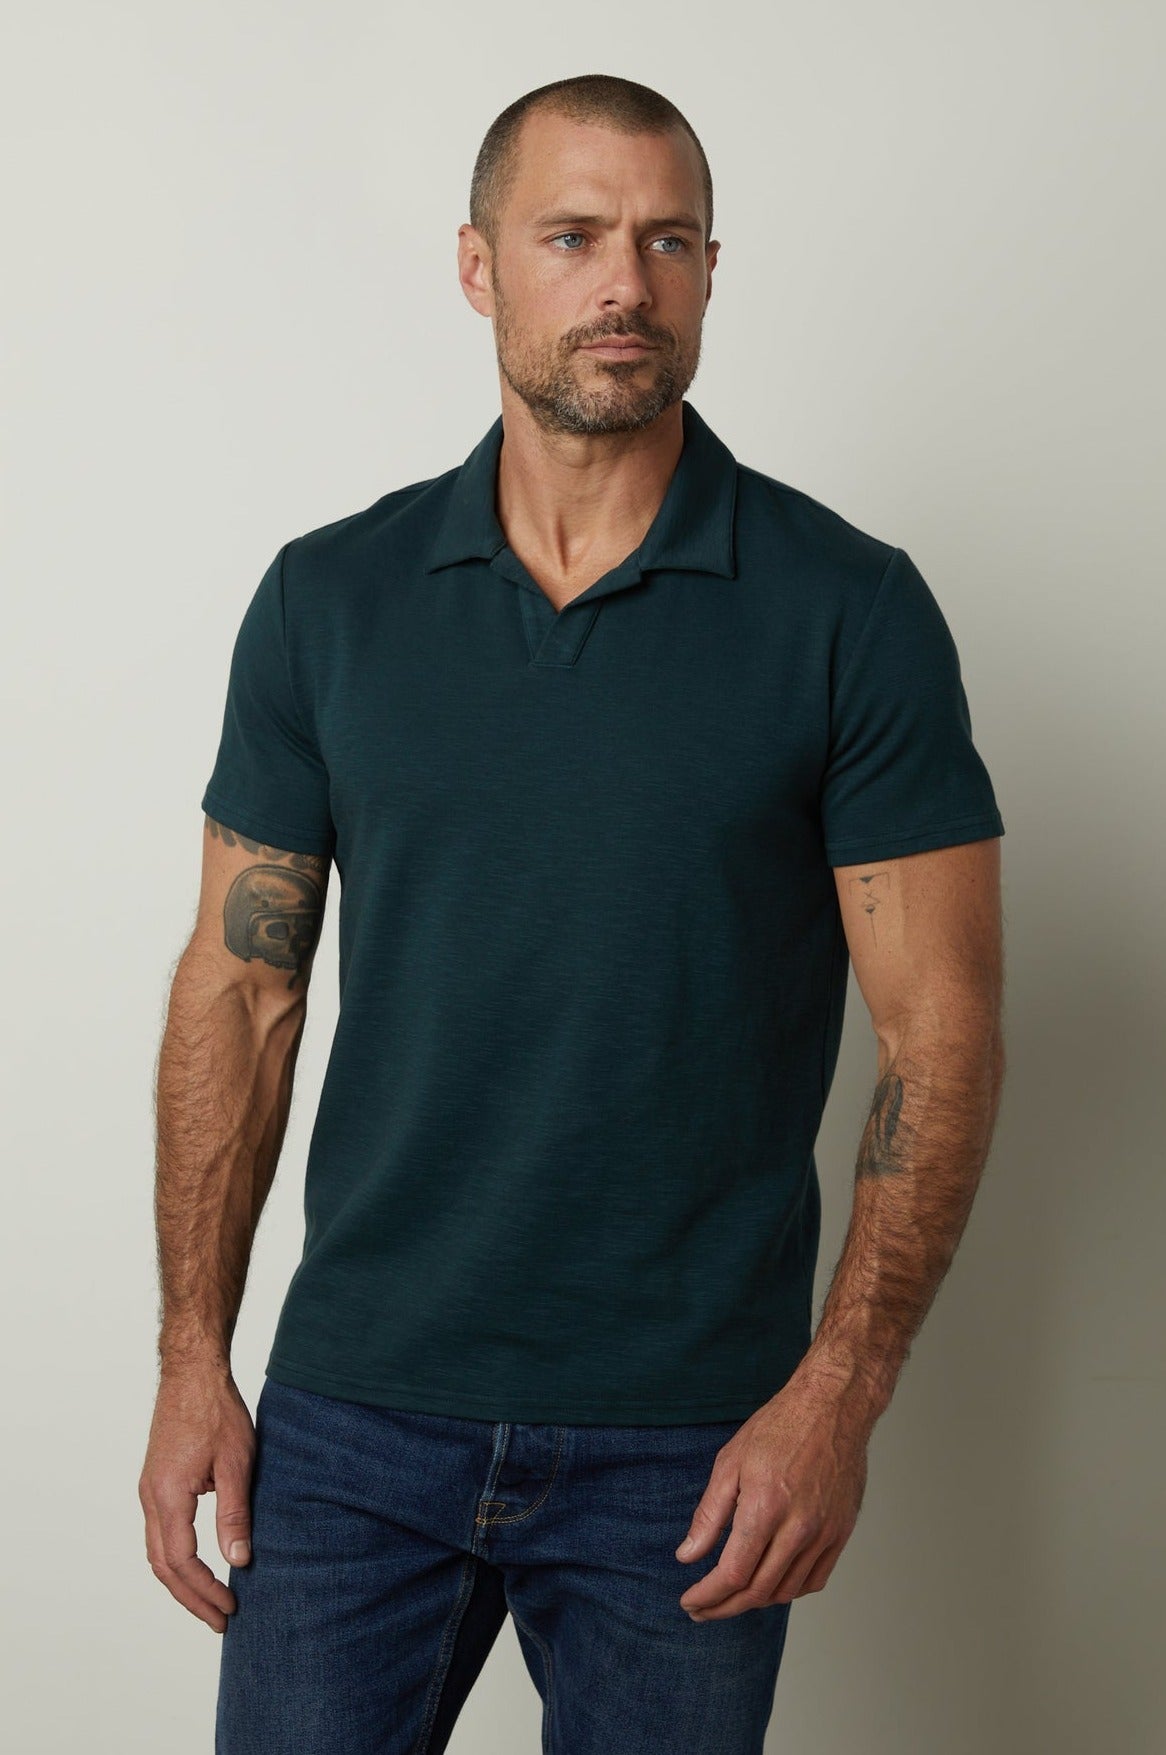 A man wearing a Velvet by Graham & Spencer DILAN COTTON BLEND POLO shirt and jeans.-26846254596289